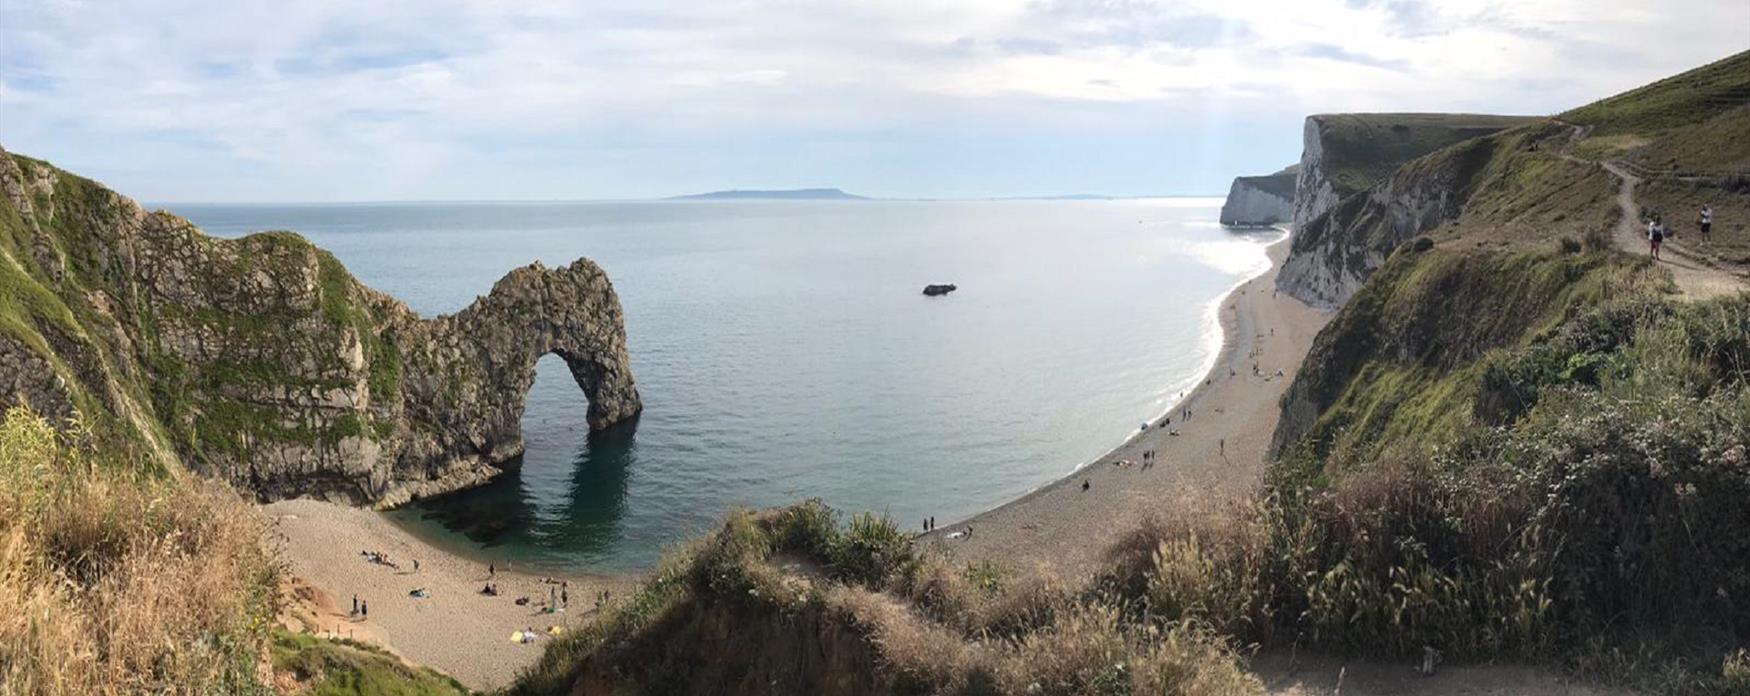 A wide angled view of the coastal arch of Durdle Door, the beach and the rolling coastal cliffs beyond.